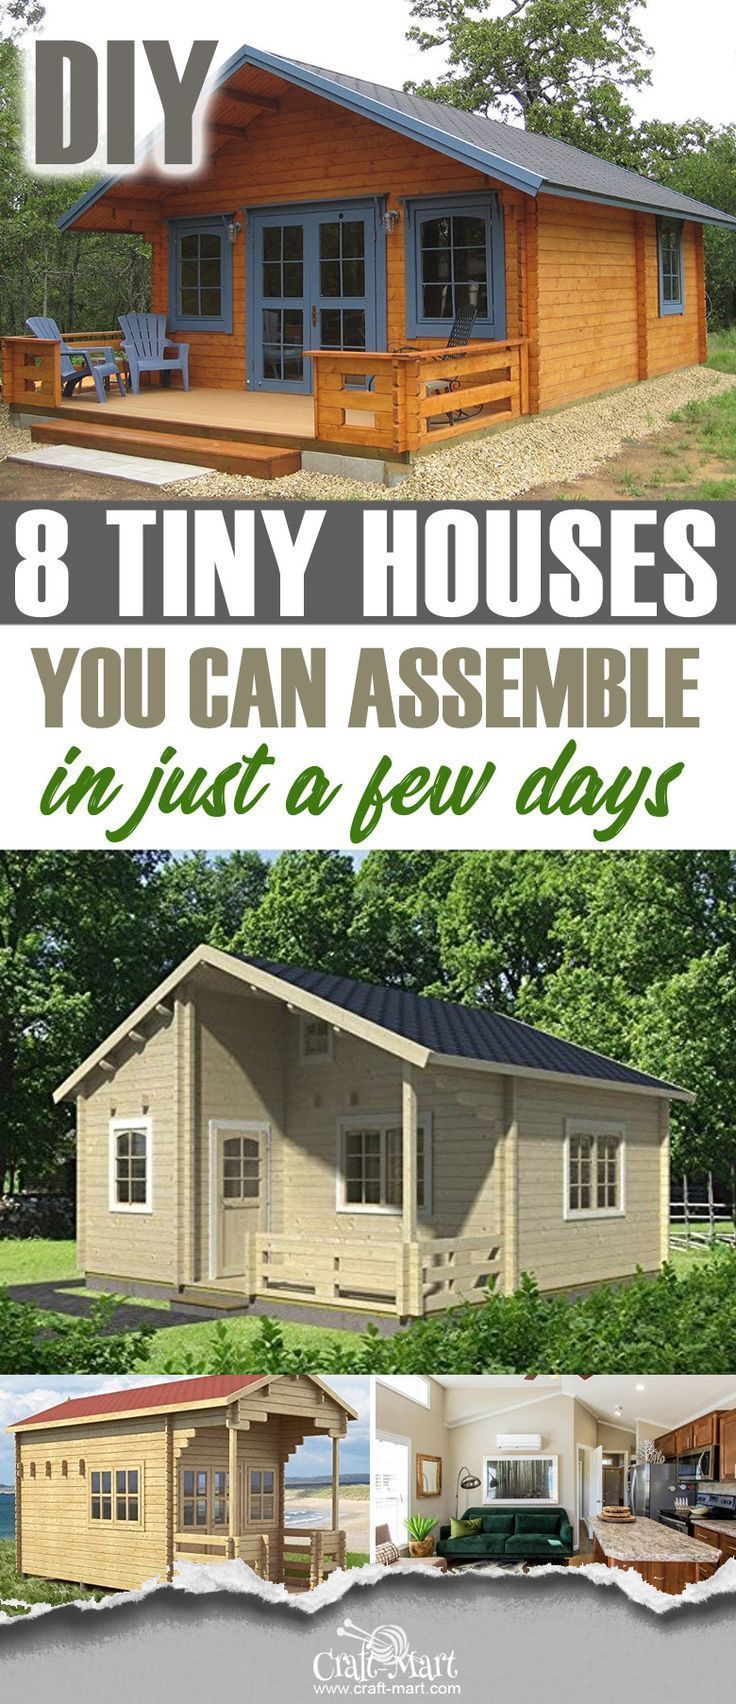 Prefab Tiny Houses You Can Order Online Right Now - Craft-Mart - Prefab Tiny Houses You Can Order Online Right Now - Craft-Mart -   15 diy House plans ideas